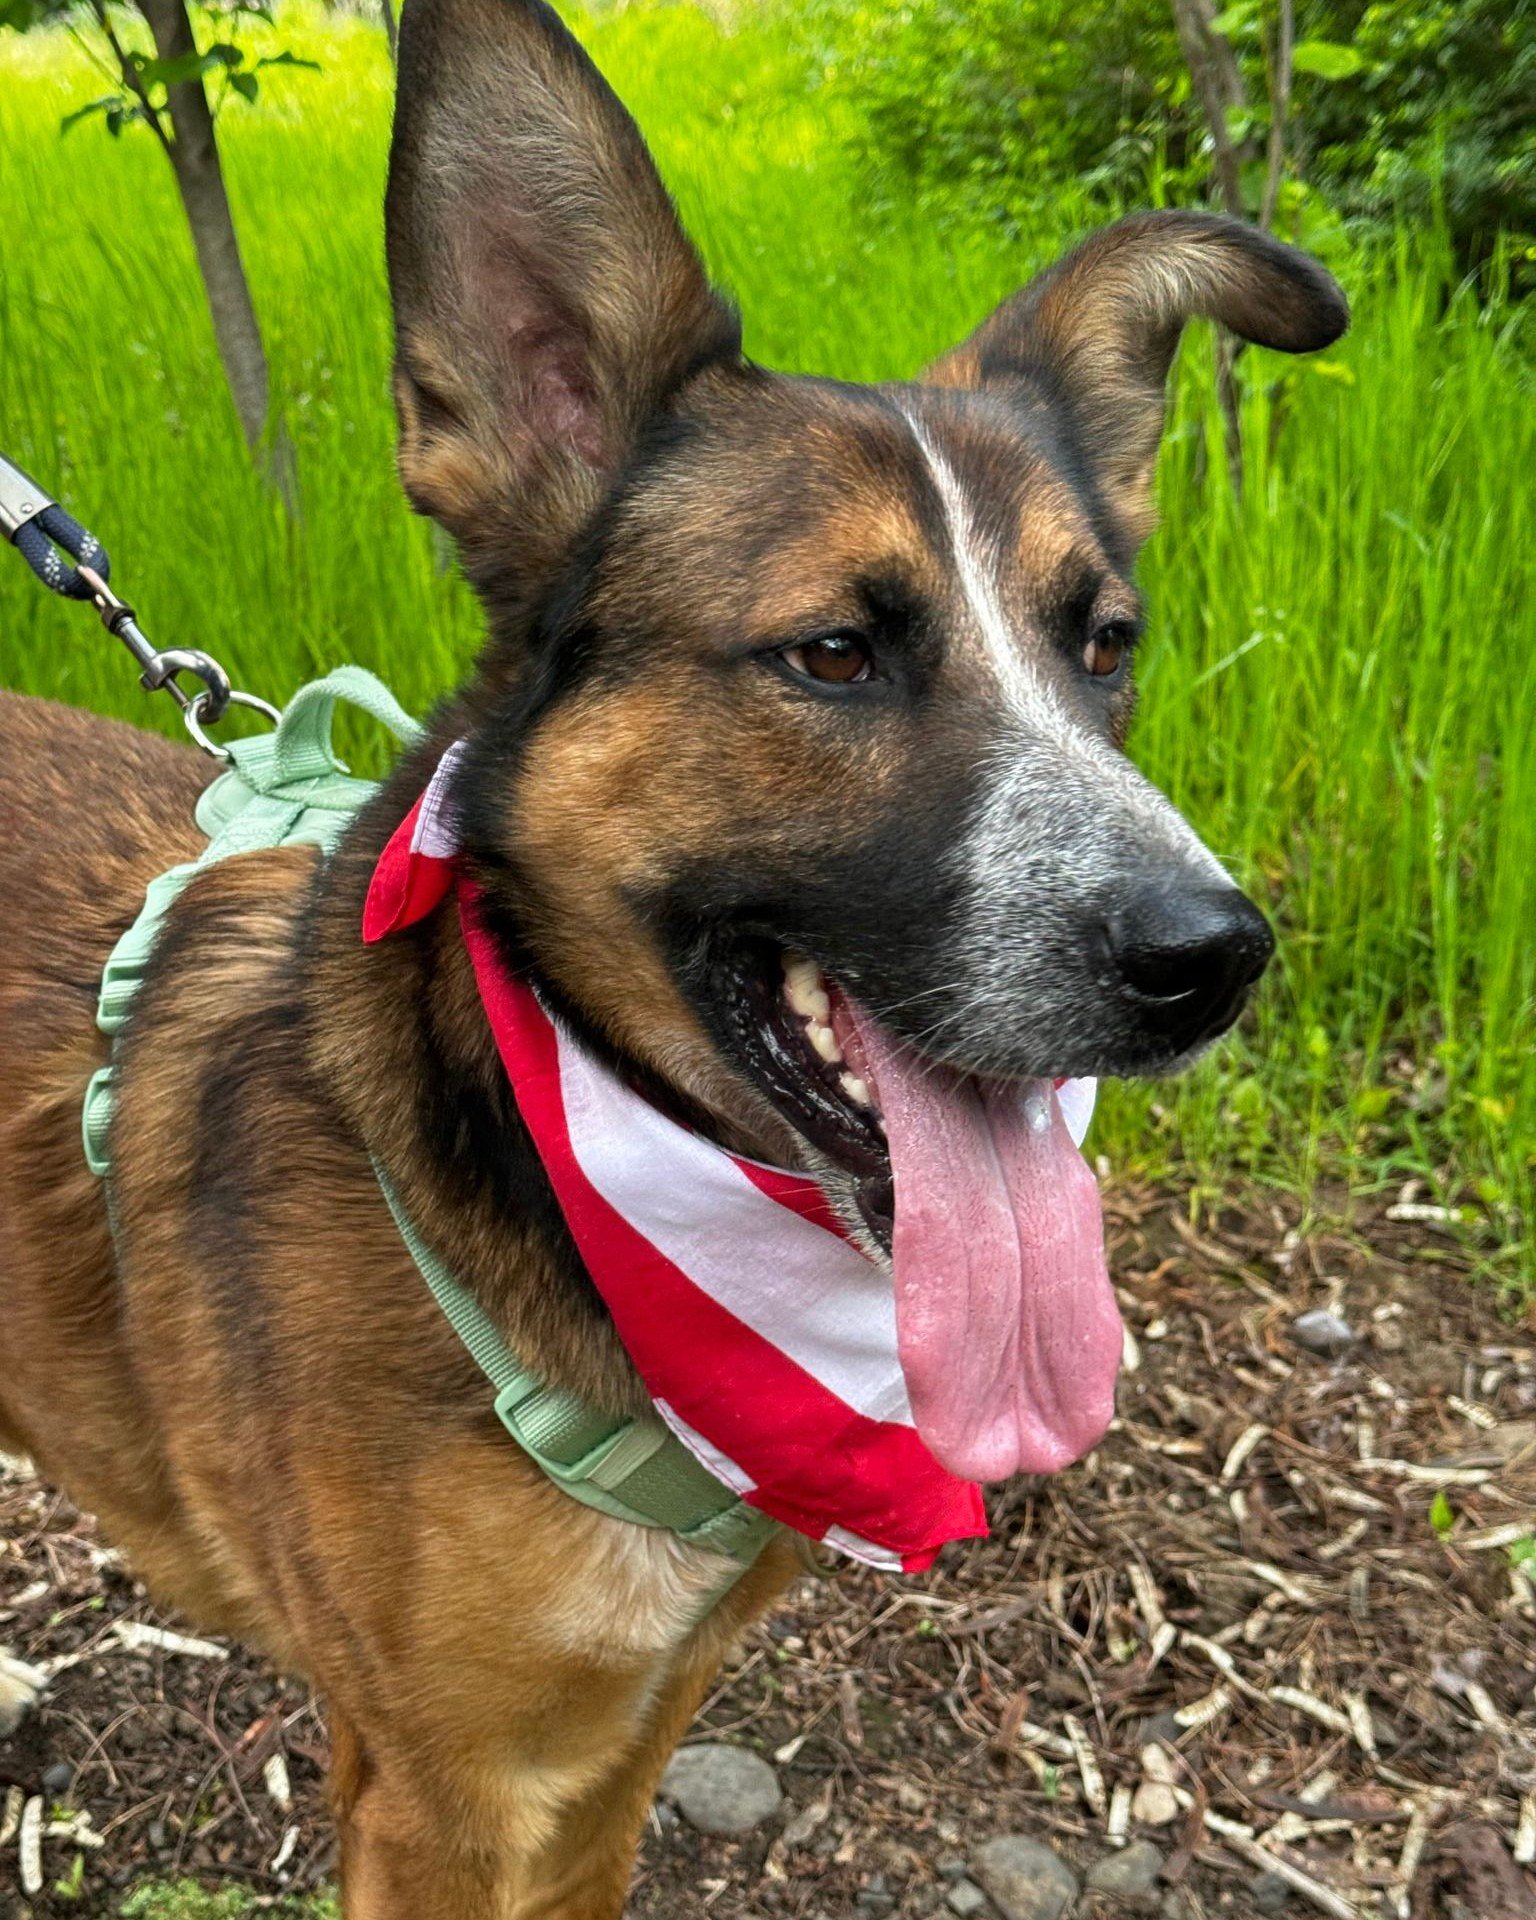 Volunteers Machelle and Bonnie took long-stay pup Gizmo on a Pawsitive Adventure today, exploring Rooks Park, the Community College, and Mill Creek Trail. He enjoyed meeting new friends, watching children play, and hearing nature's sounds. And guess 